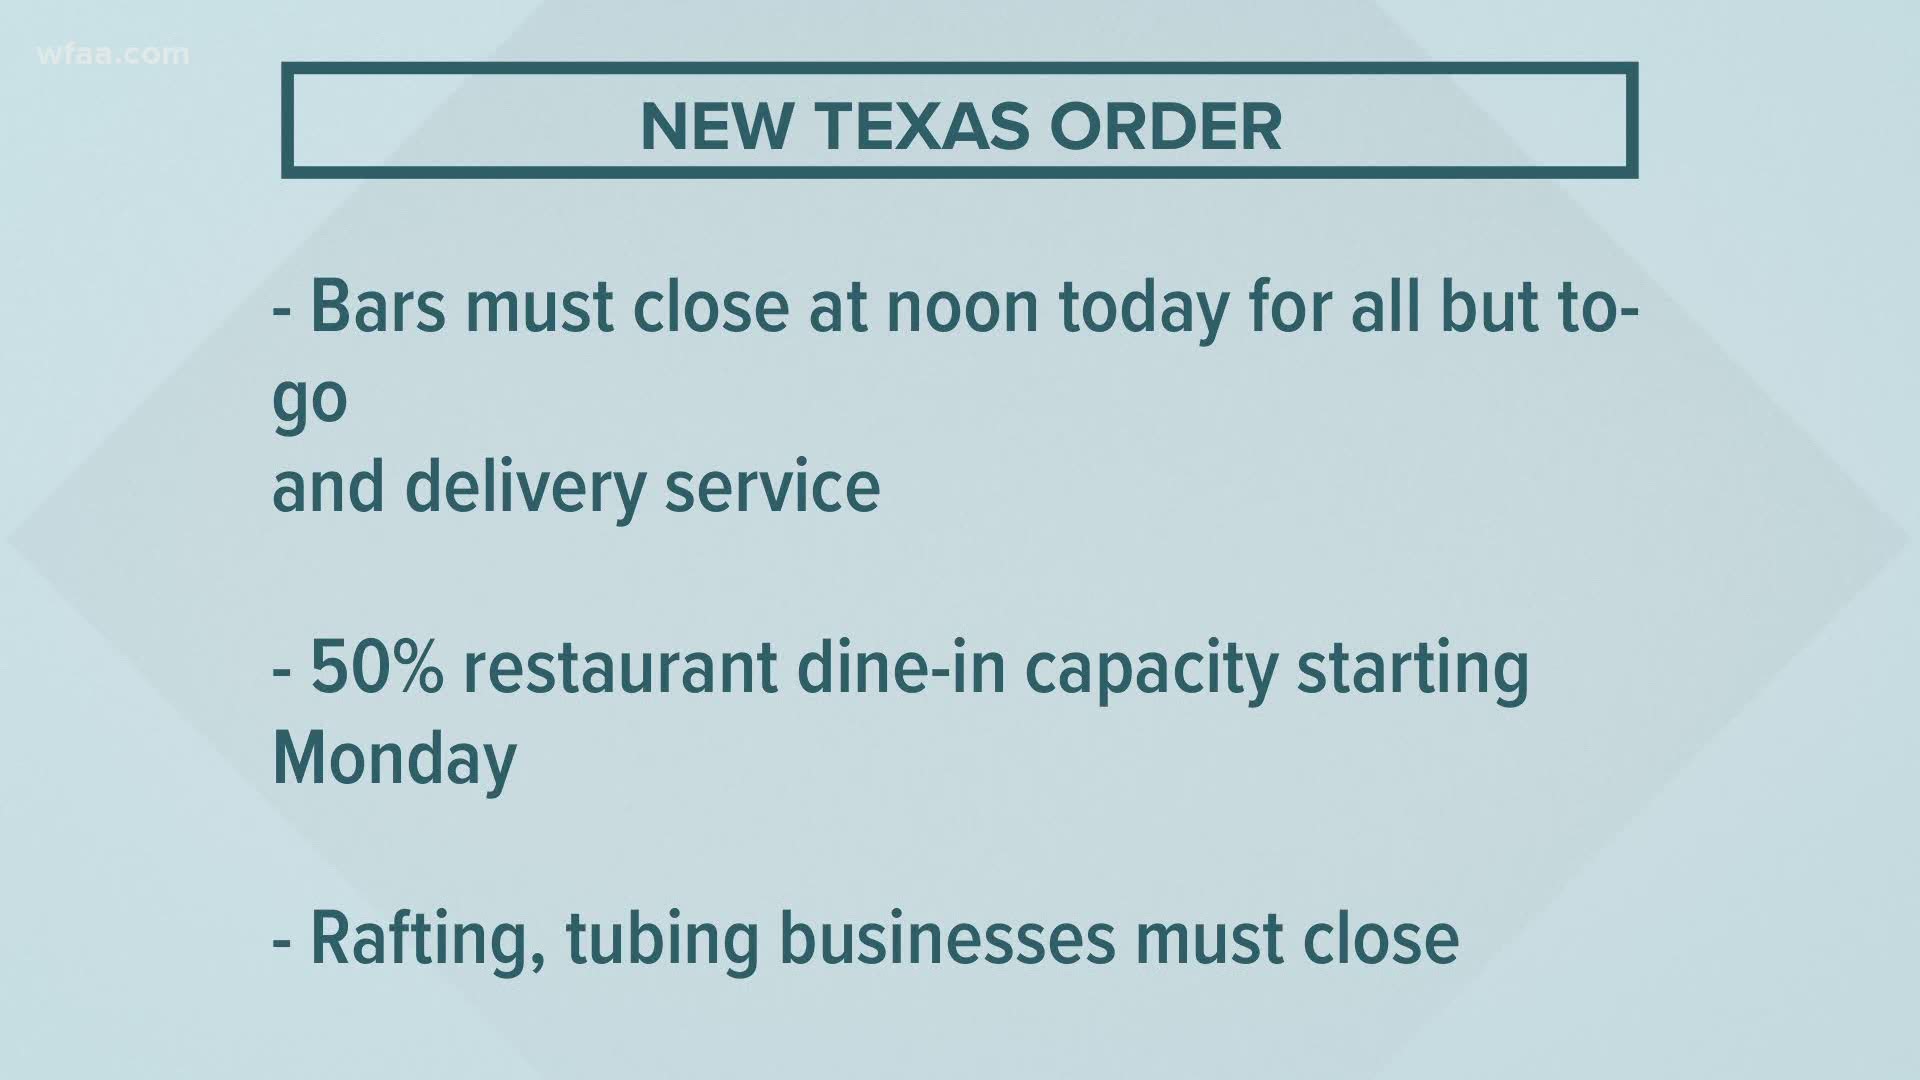 Gov. Greg Abbott ordered an executive order that requires bars to close by 12 p.m. Friday and restaurants to reduce dine-in capacity to 50% beginning Monday.